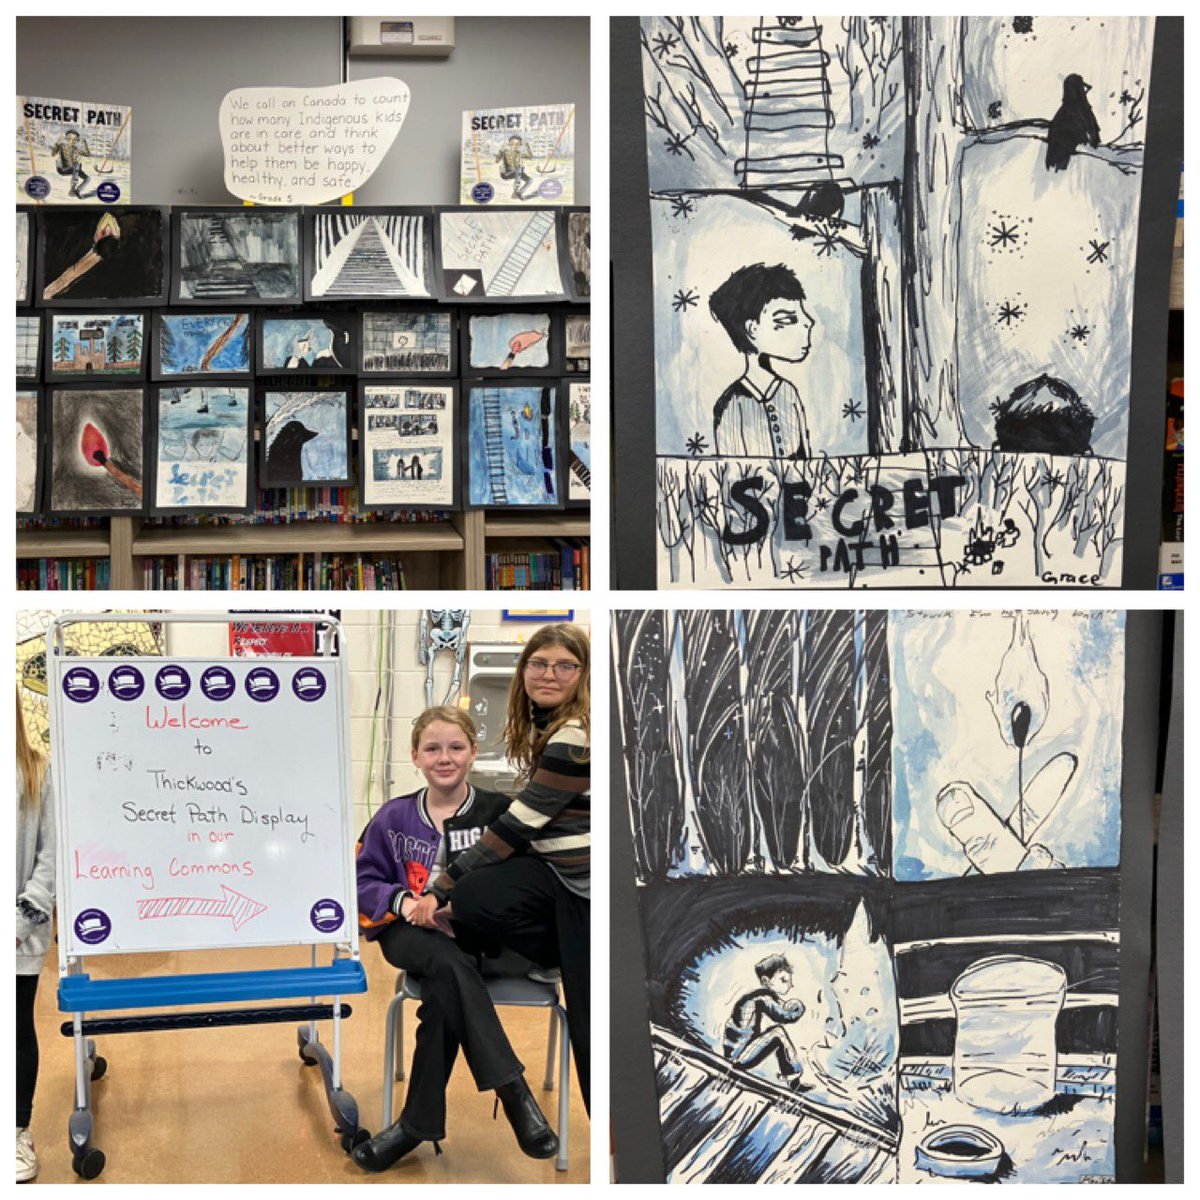 Secret Path week has provided an opportunity for @thickwoodArts to share their understanding of the calls to action through art. @FMPSD #thankyou @downiewenjack @AthabascaTC @ATA_IEC